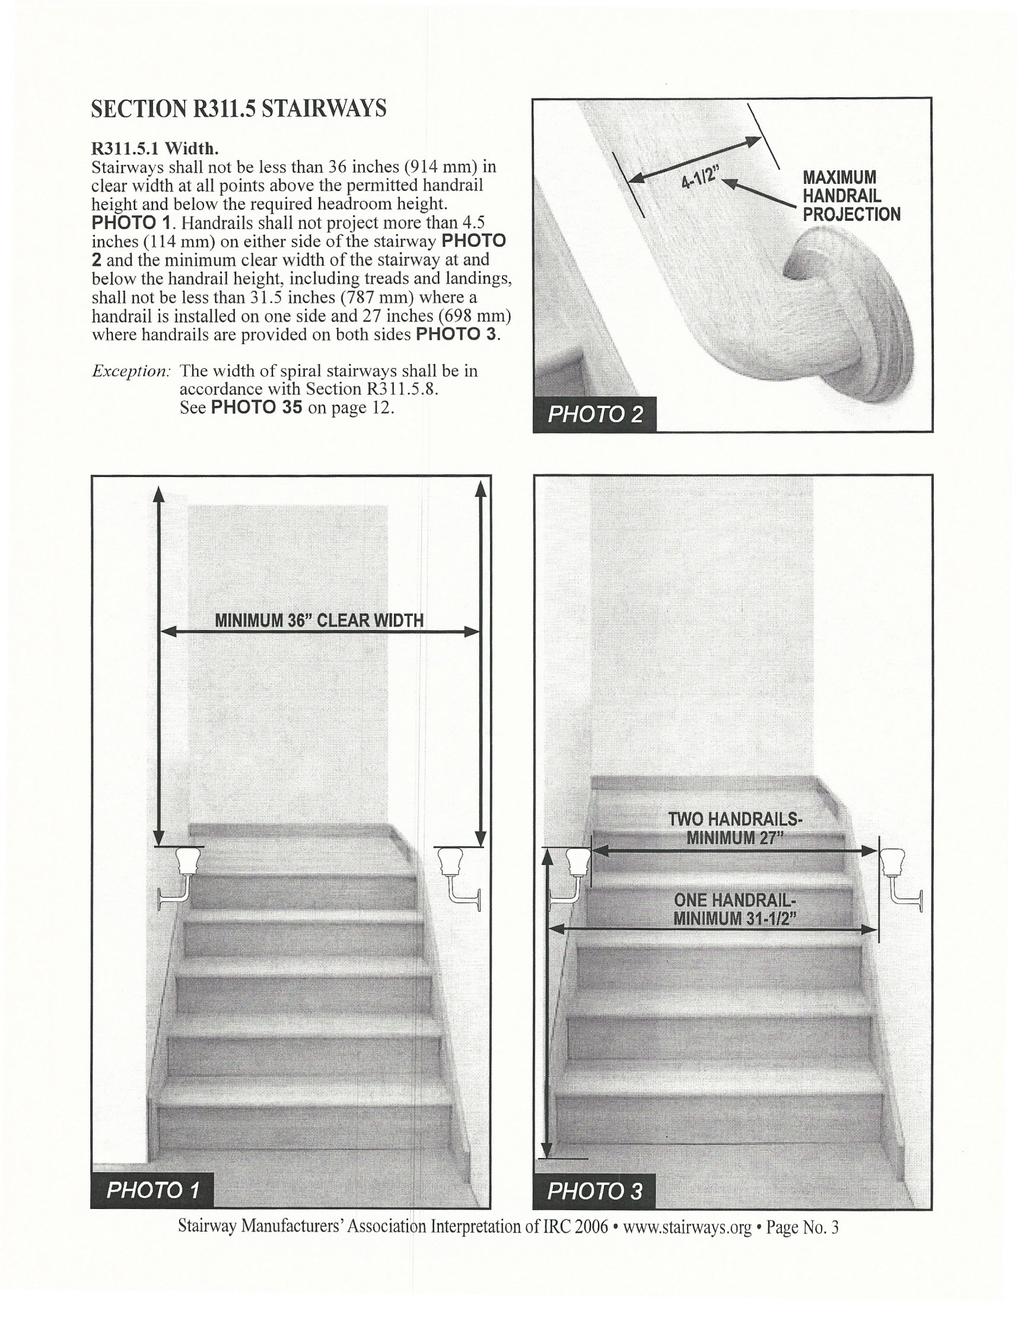 SECTION R311.5 STAIRWAYS R311.5.1 Width. Stairways shall not be less than 36 inches (914 mm) in clear width at all points above the permitted handrail height and below the required headroom height.